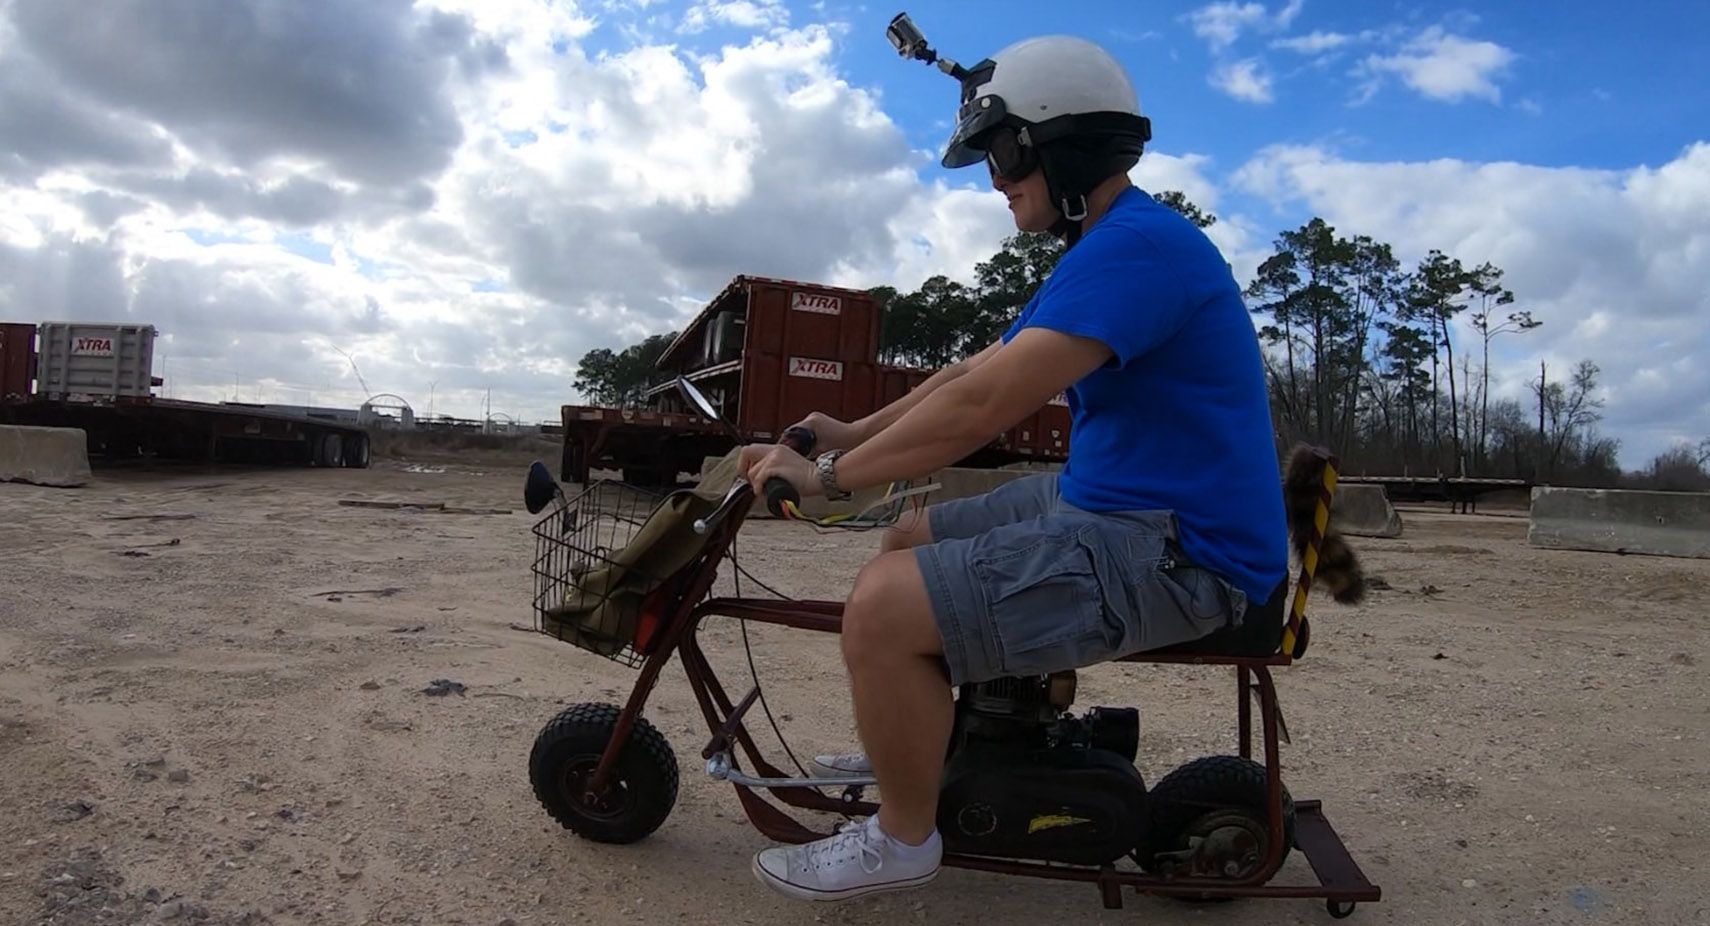 From A Starting Bidding Price Of $8,500 On eBay, The Dumb And Dumber Minibike Climbed All The Way To $50,000